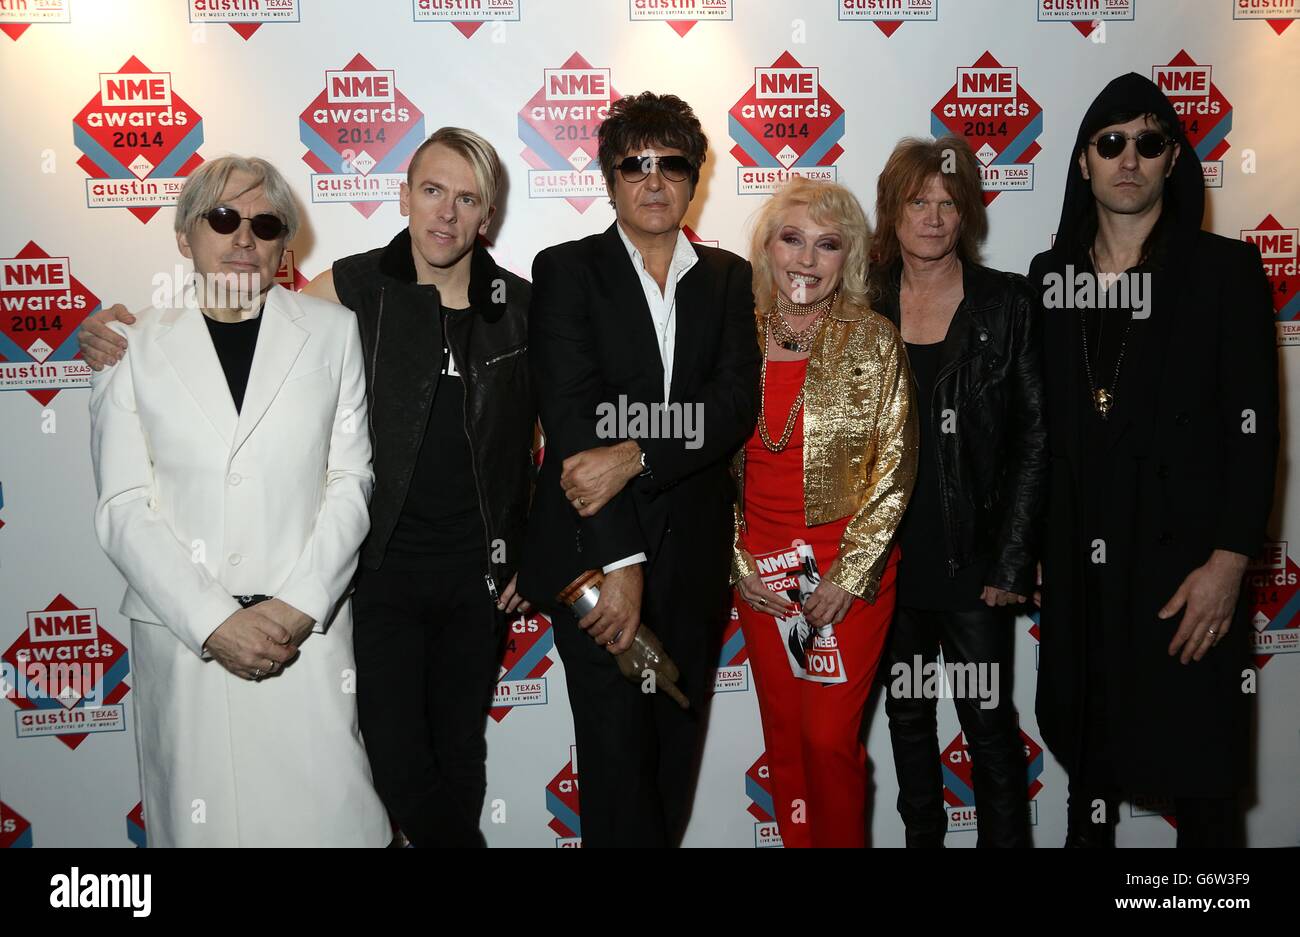 NME Awards 2014 - Arrivals - London. Blondie with Debbie Harry arriving for the 2014 NME Awards, at Brixton Academy, London. Stock Photo